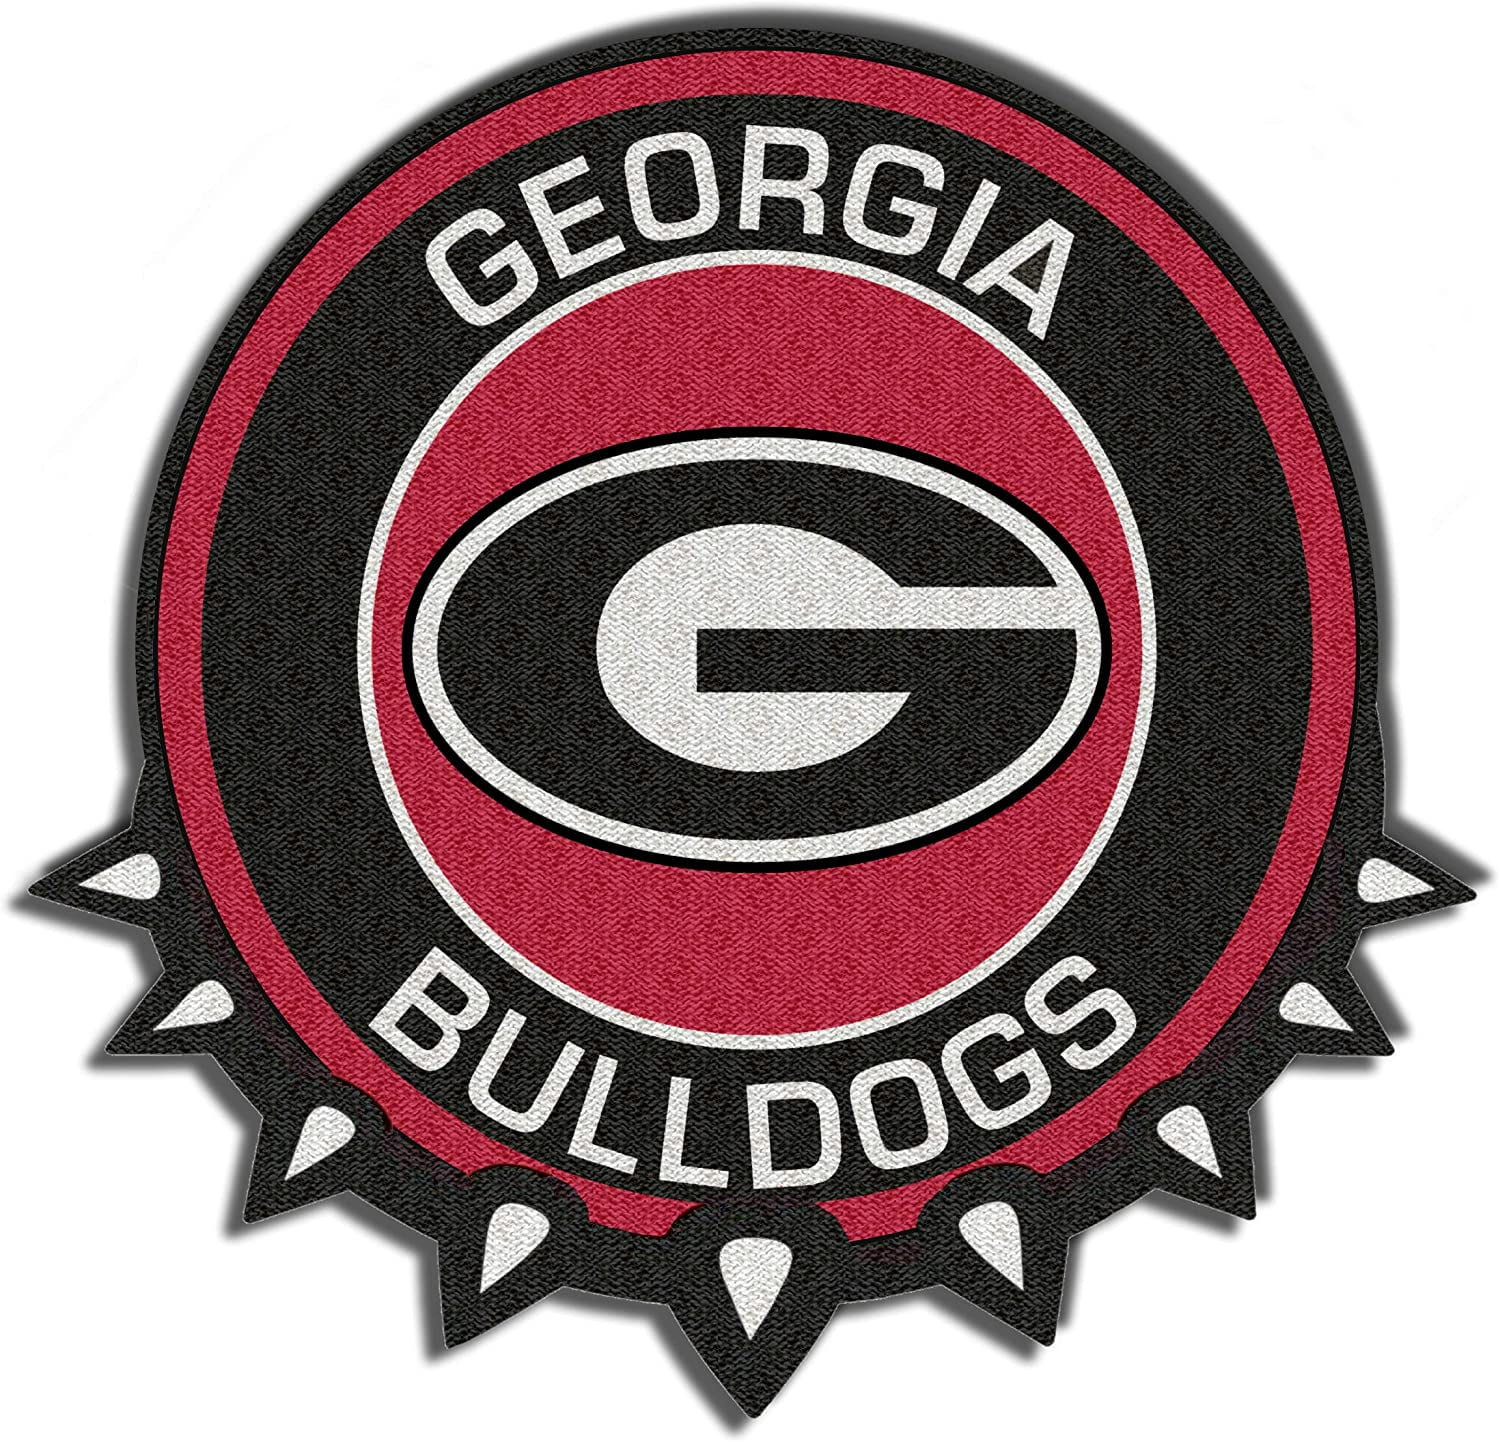 Georgia  Bulldogs   Sport  Logo   Embroidery Patch Iron and sewing on Clothes. 